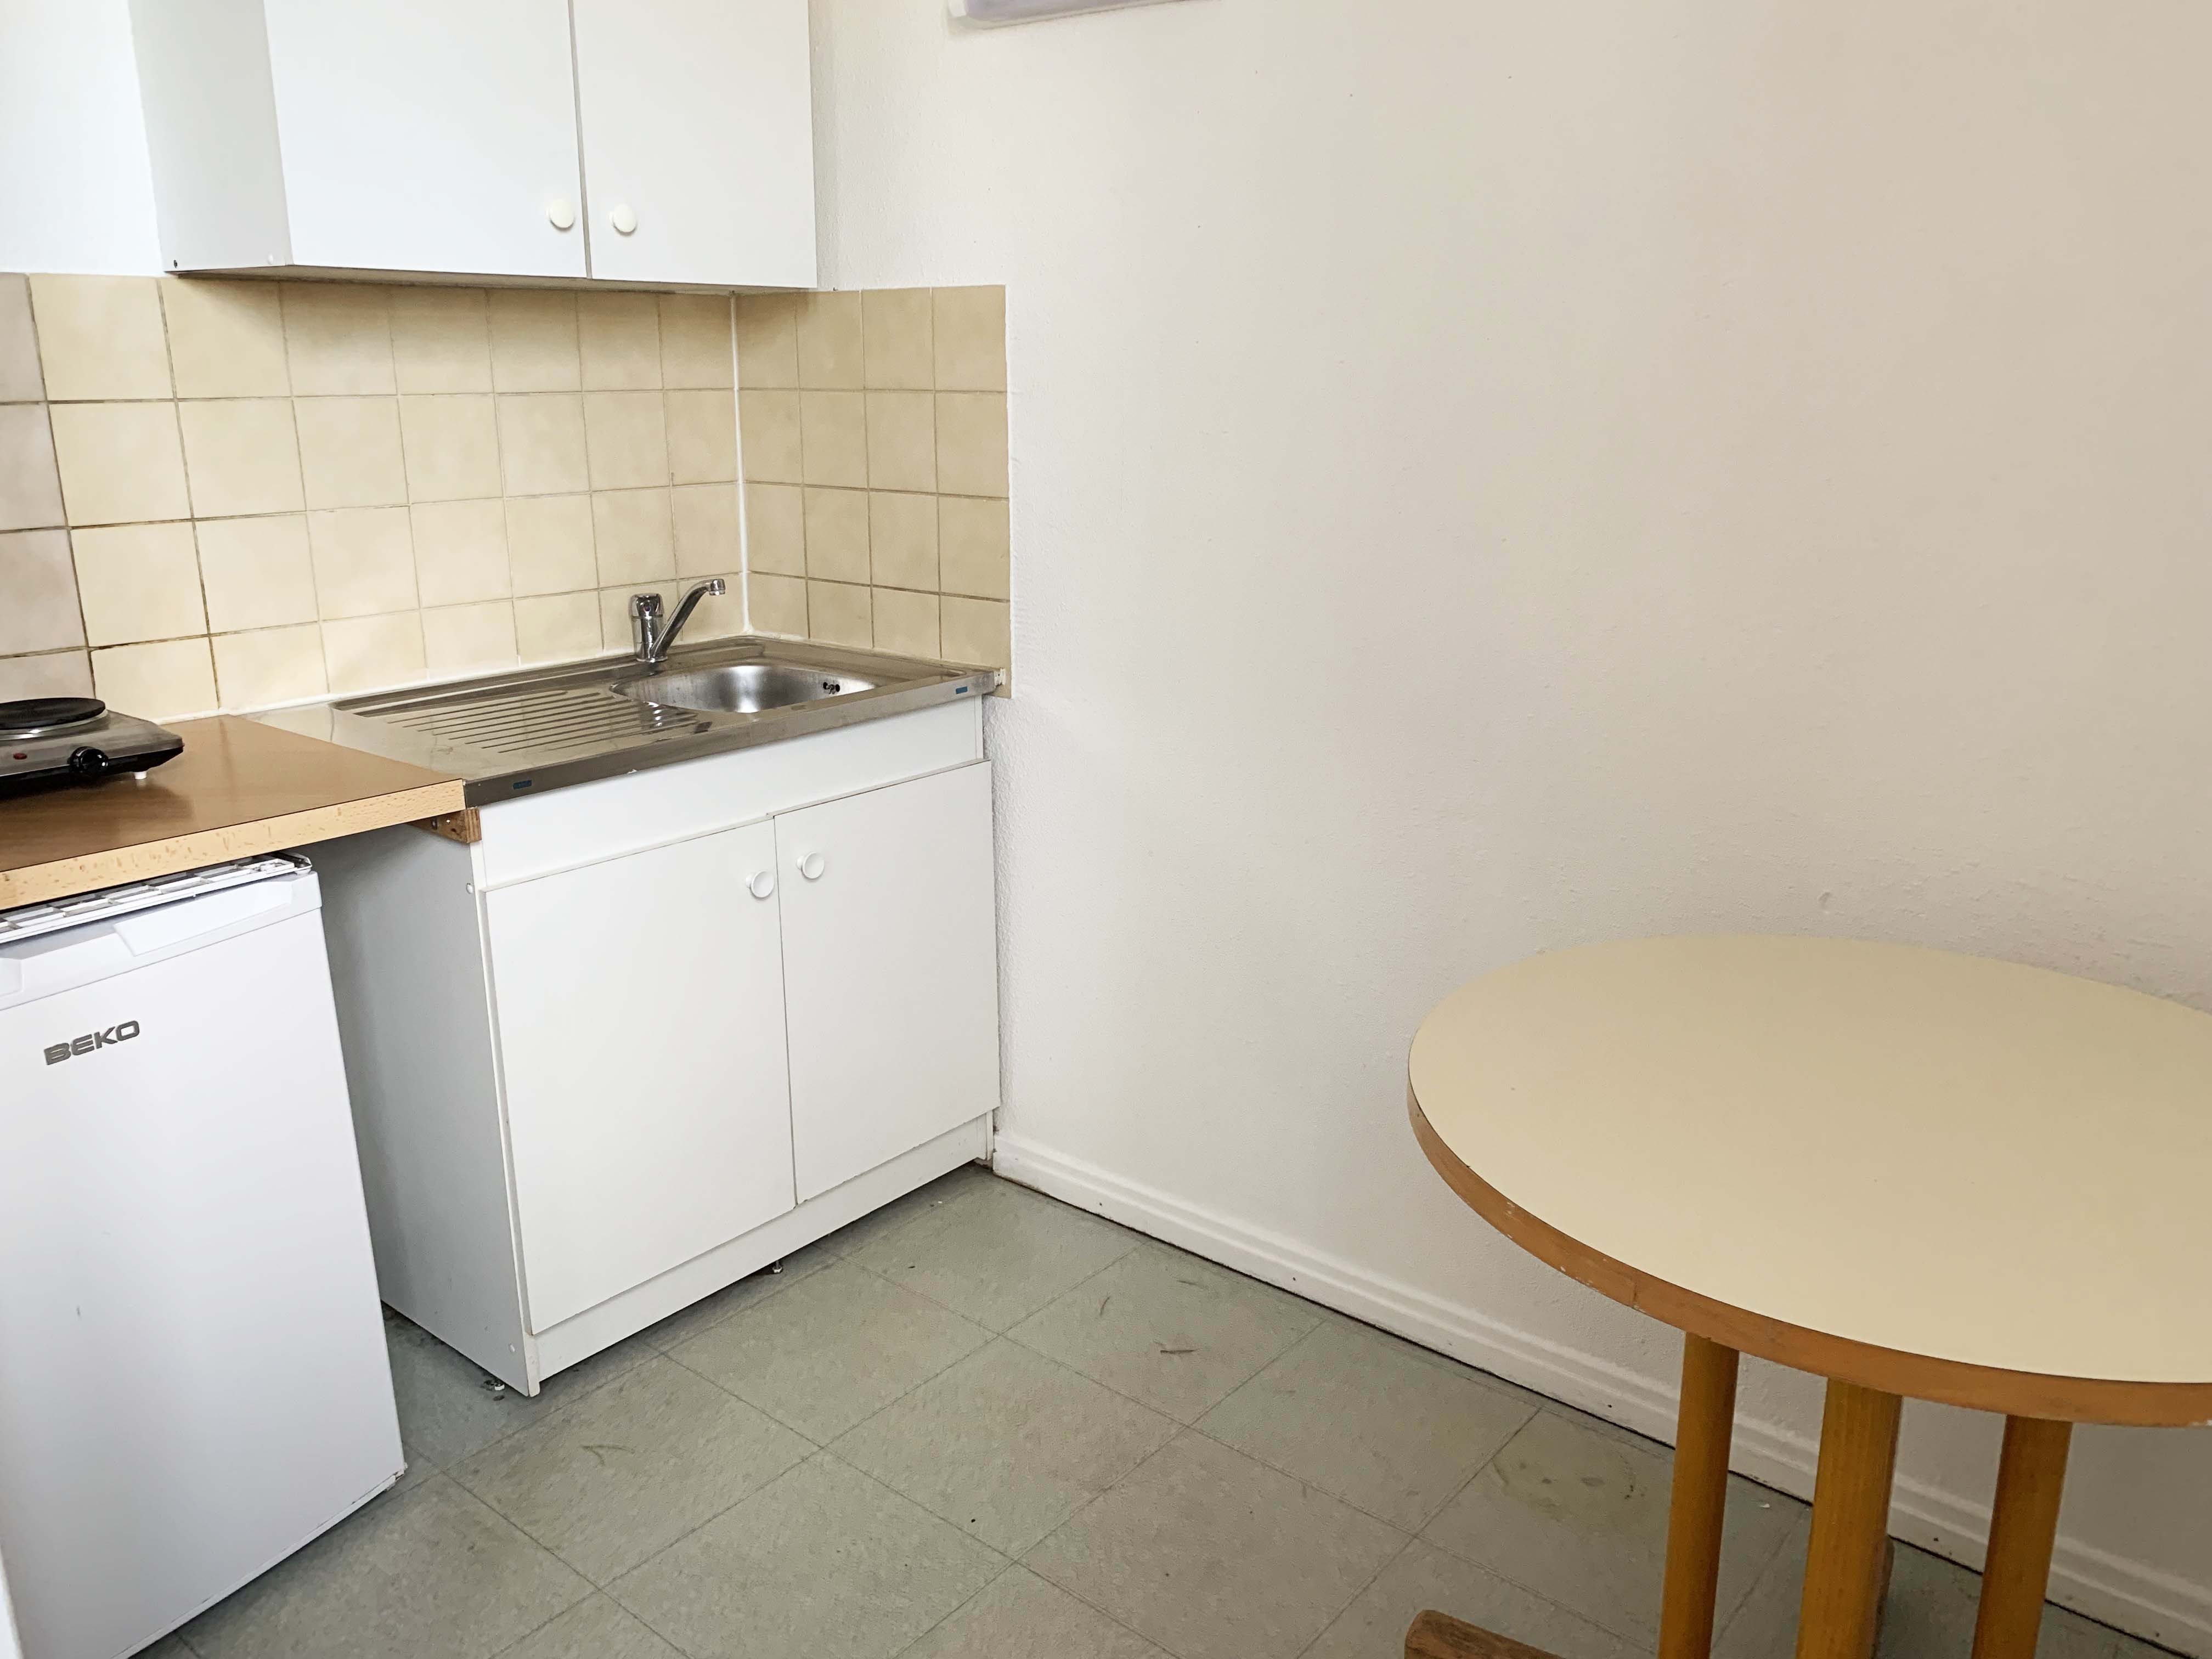 Kitchen in student studio apartment in Lyon, France.